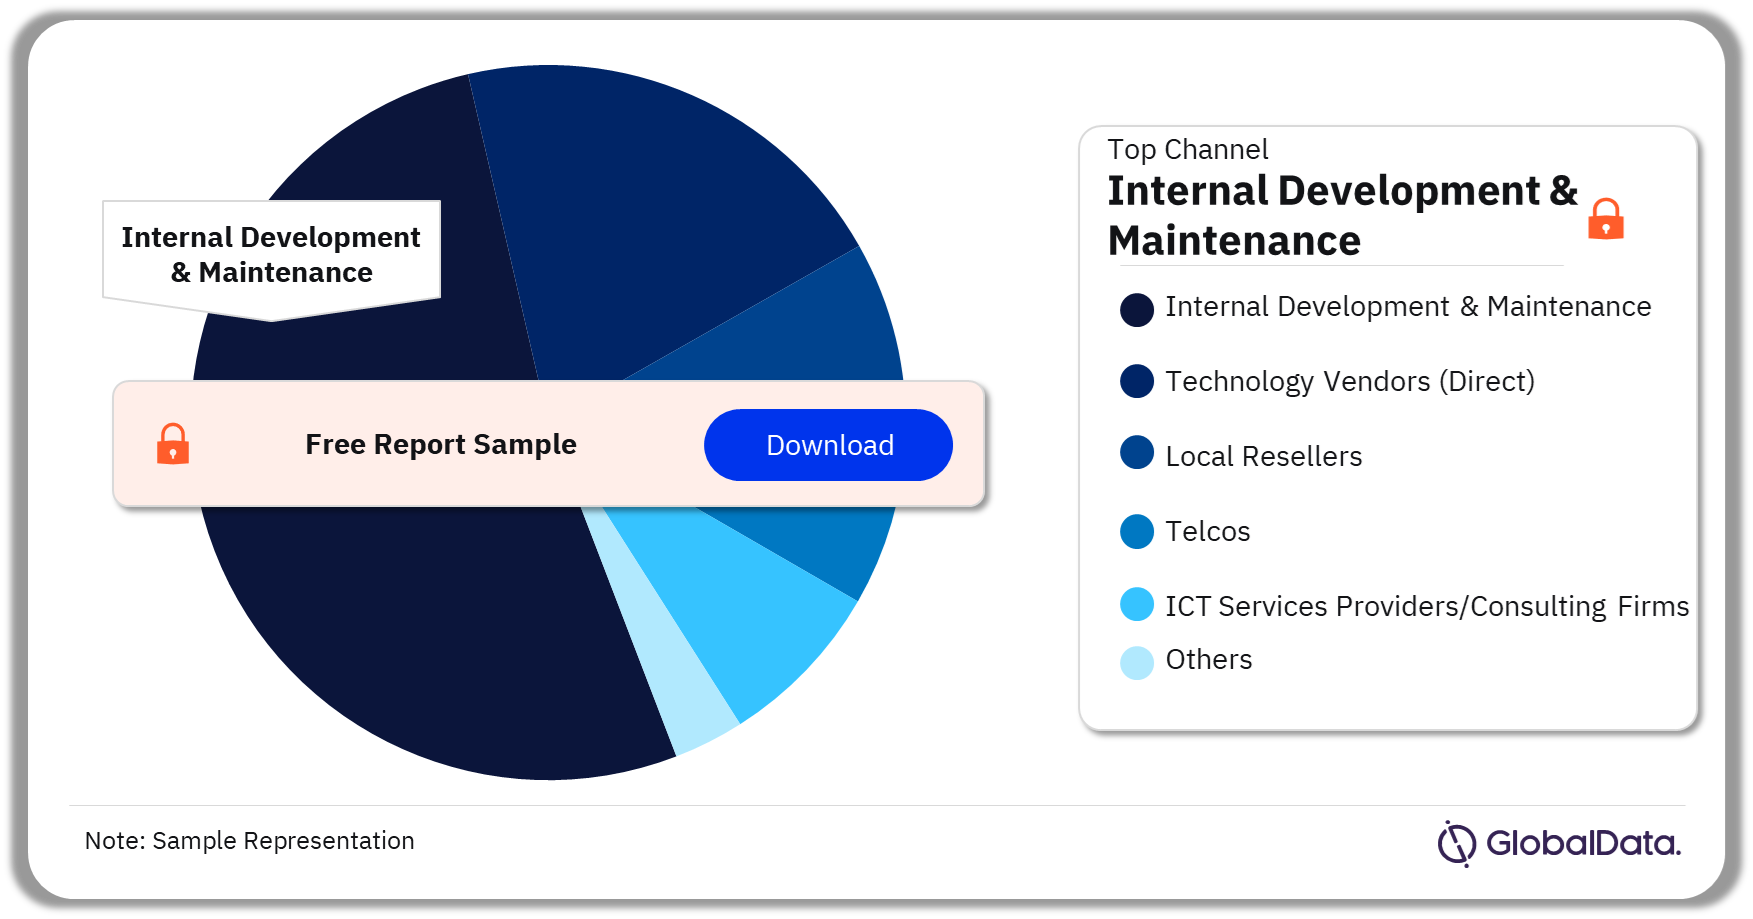 Chevron ICT Spend by Channel, 2023 (%)